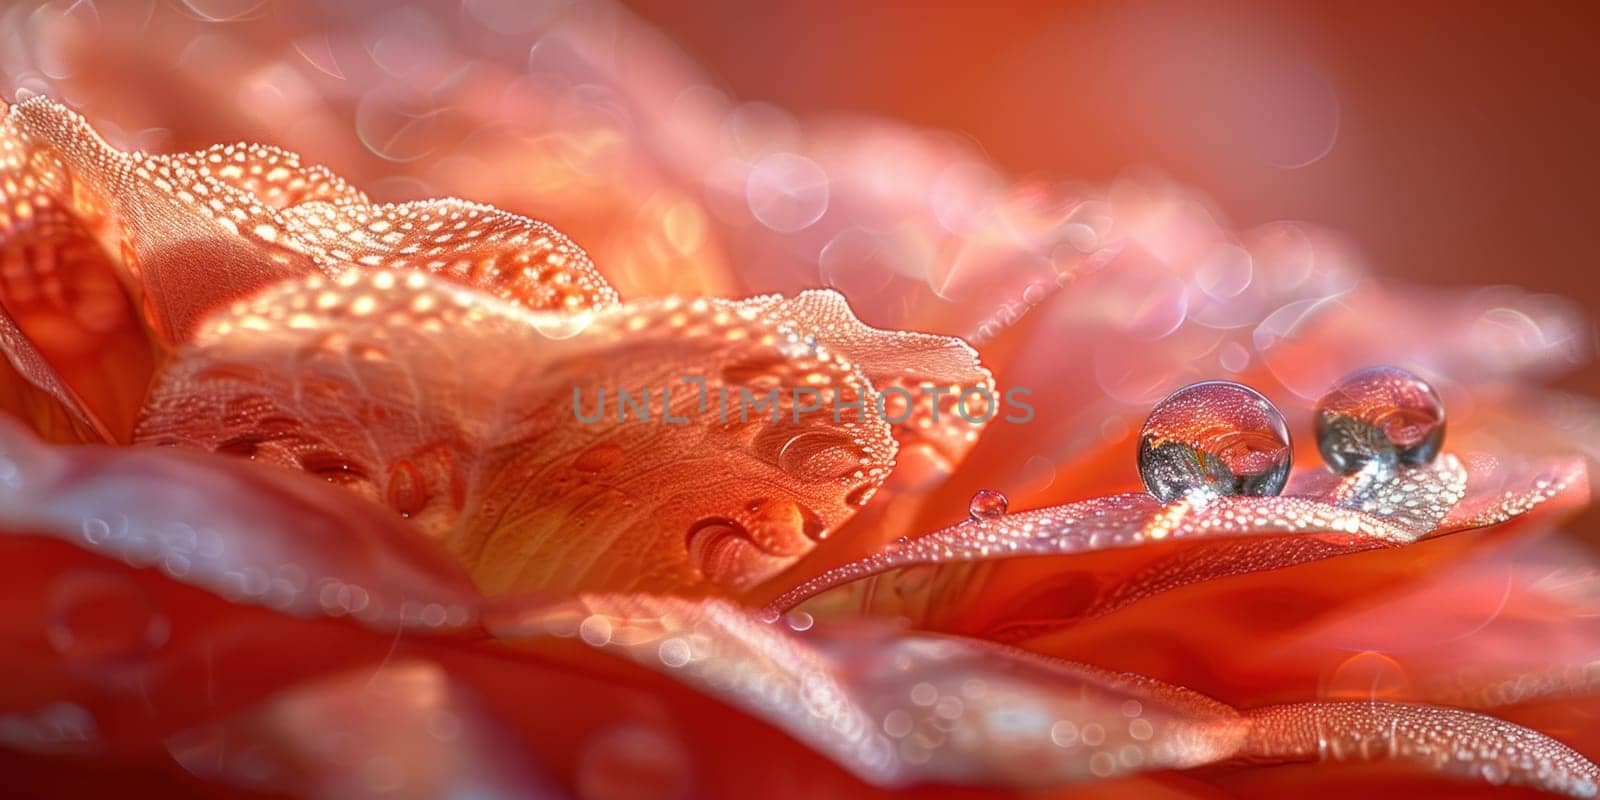 Close up of a rose petal with glistening water droplets on its surface.